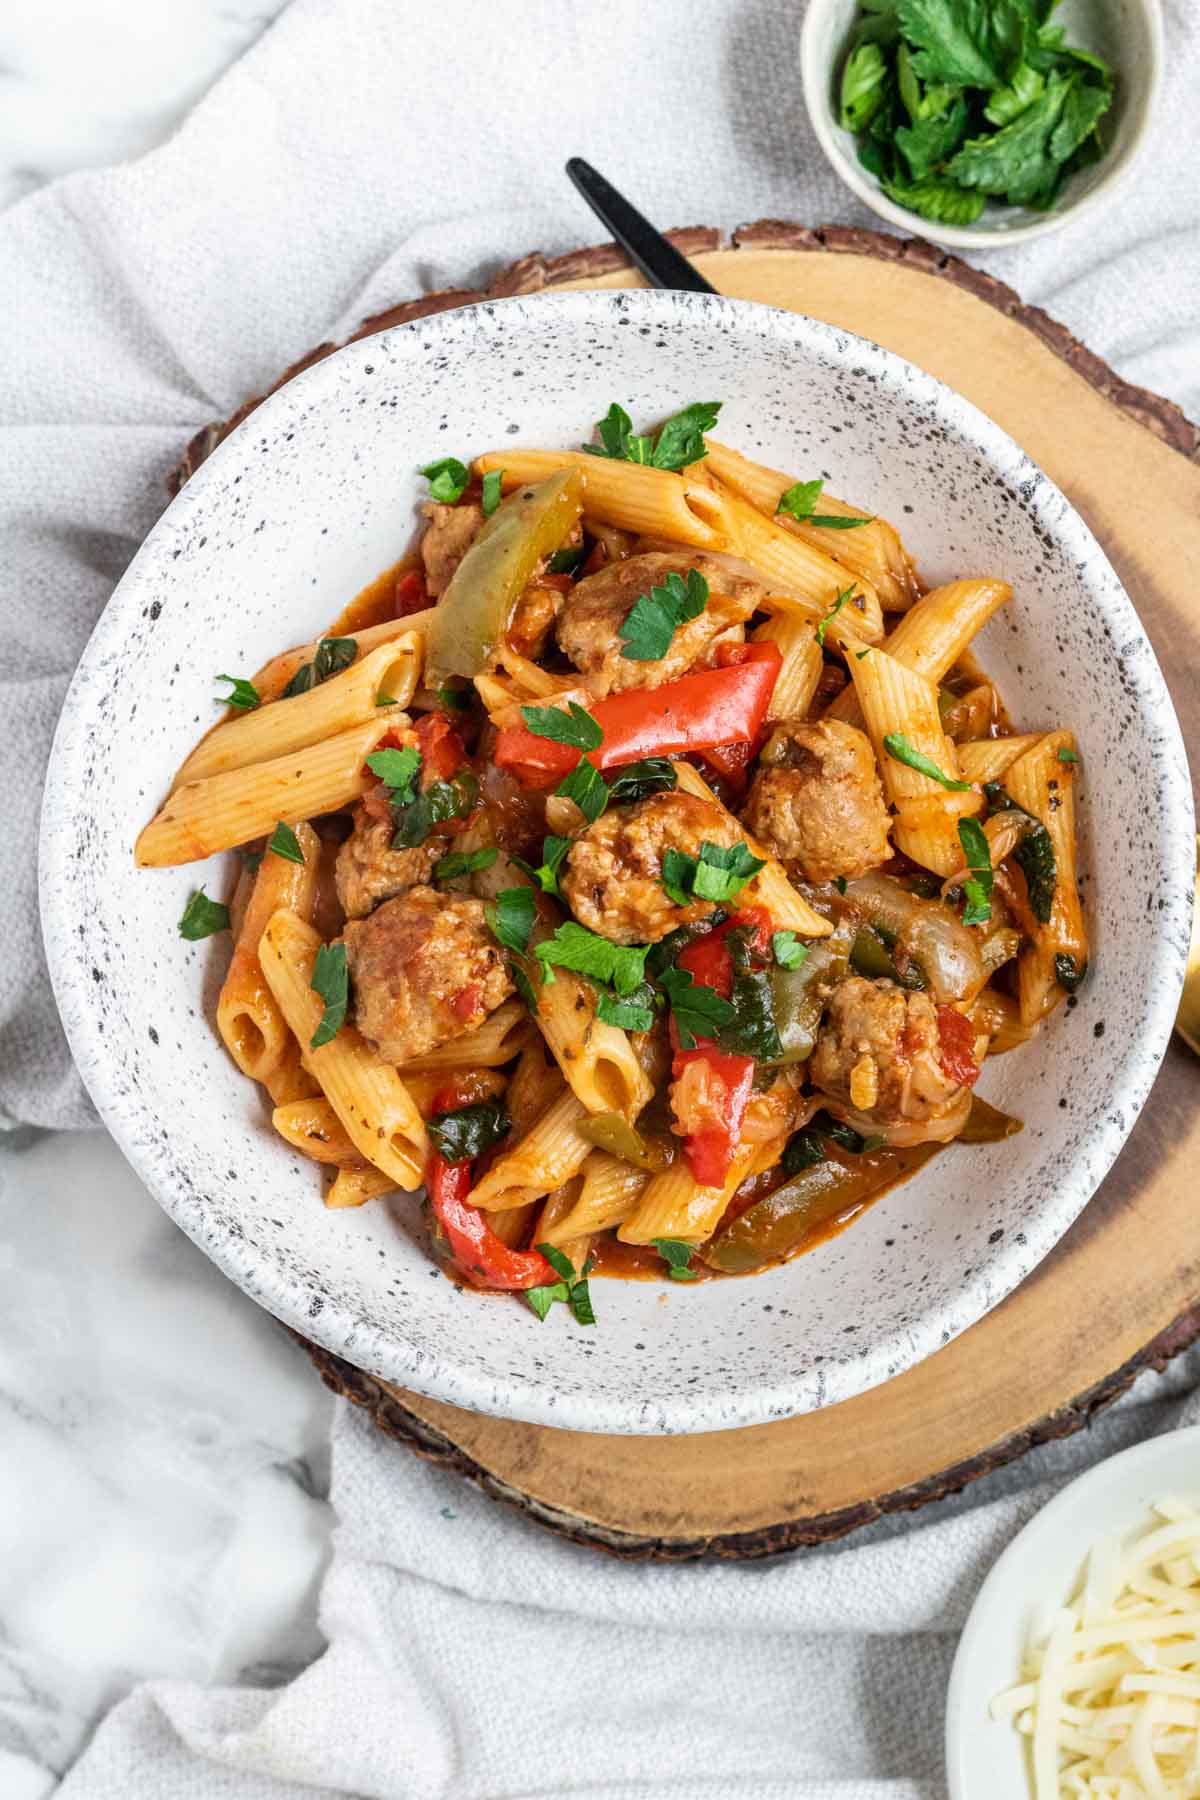 Pasta with sausages and spinach, in a bowl.